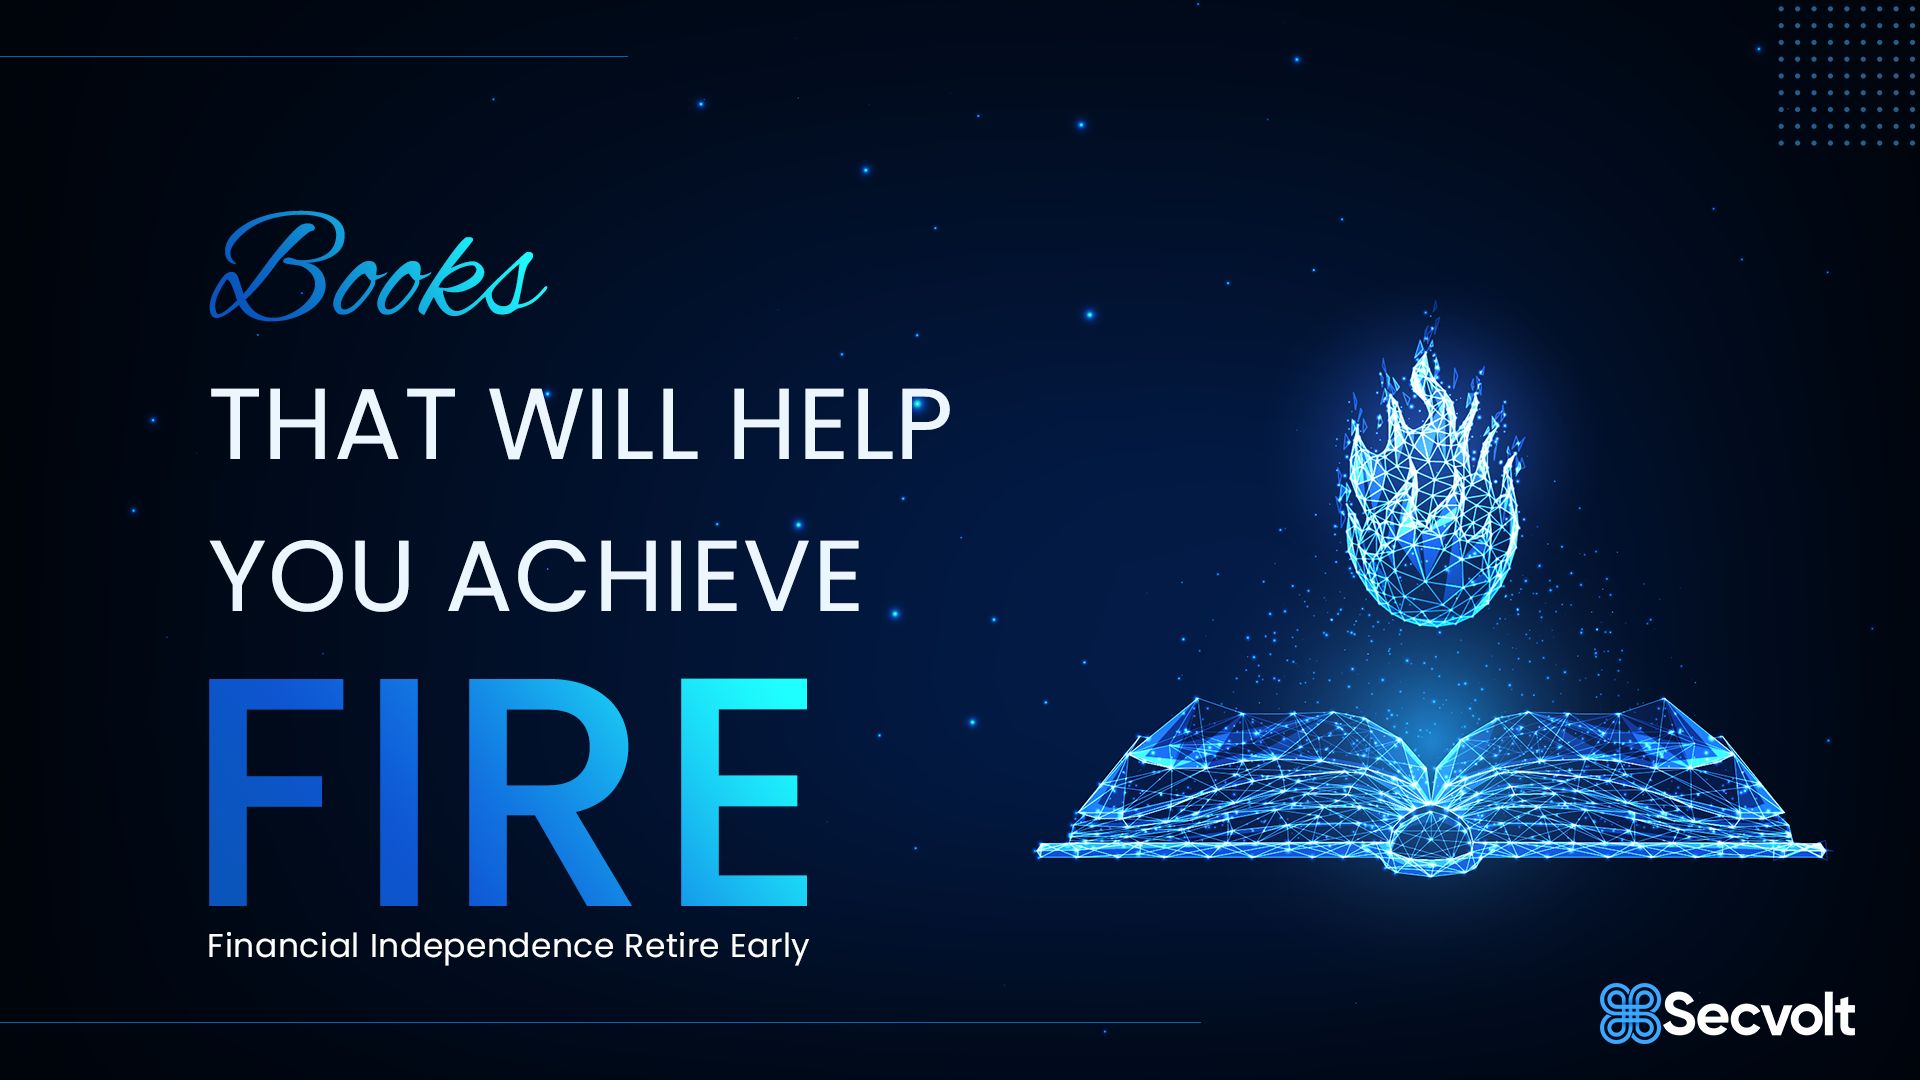 12 Best books For Fire - Financial Independence Retire Early